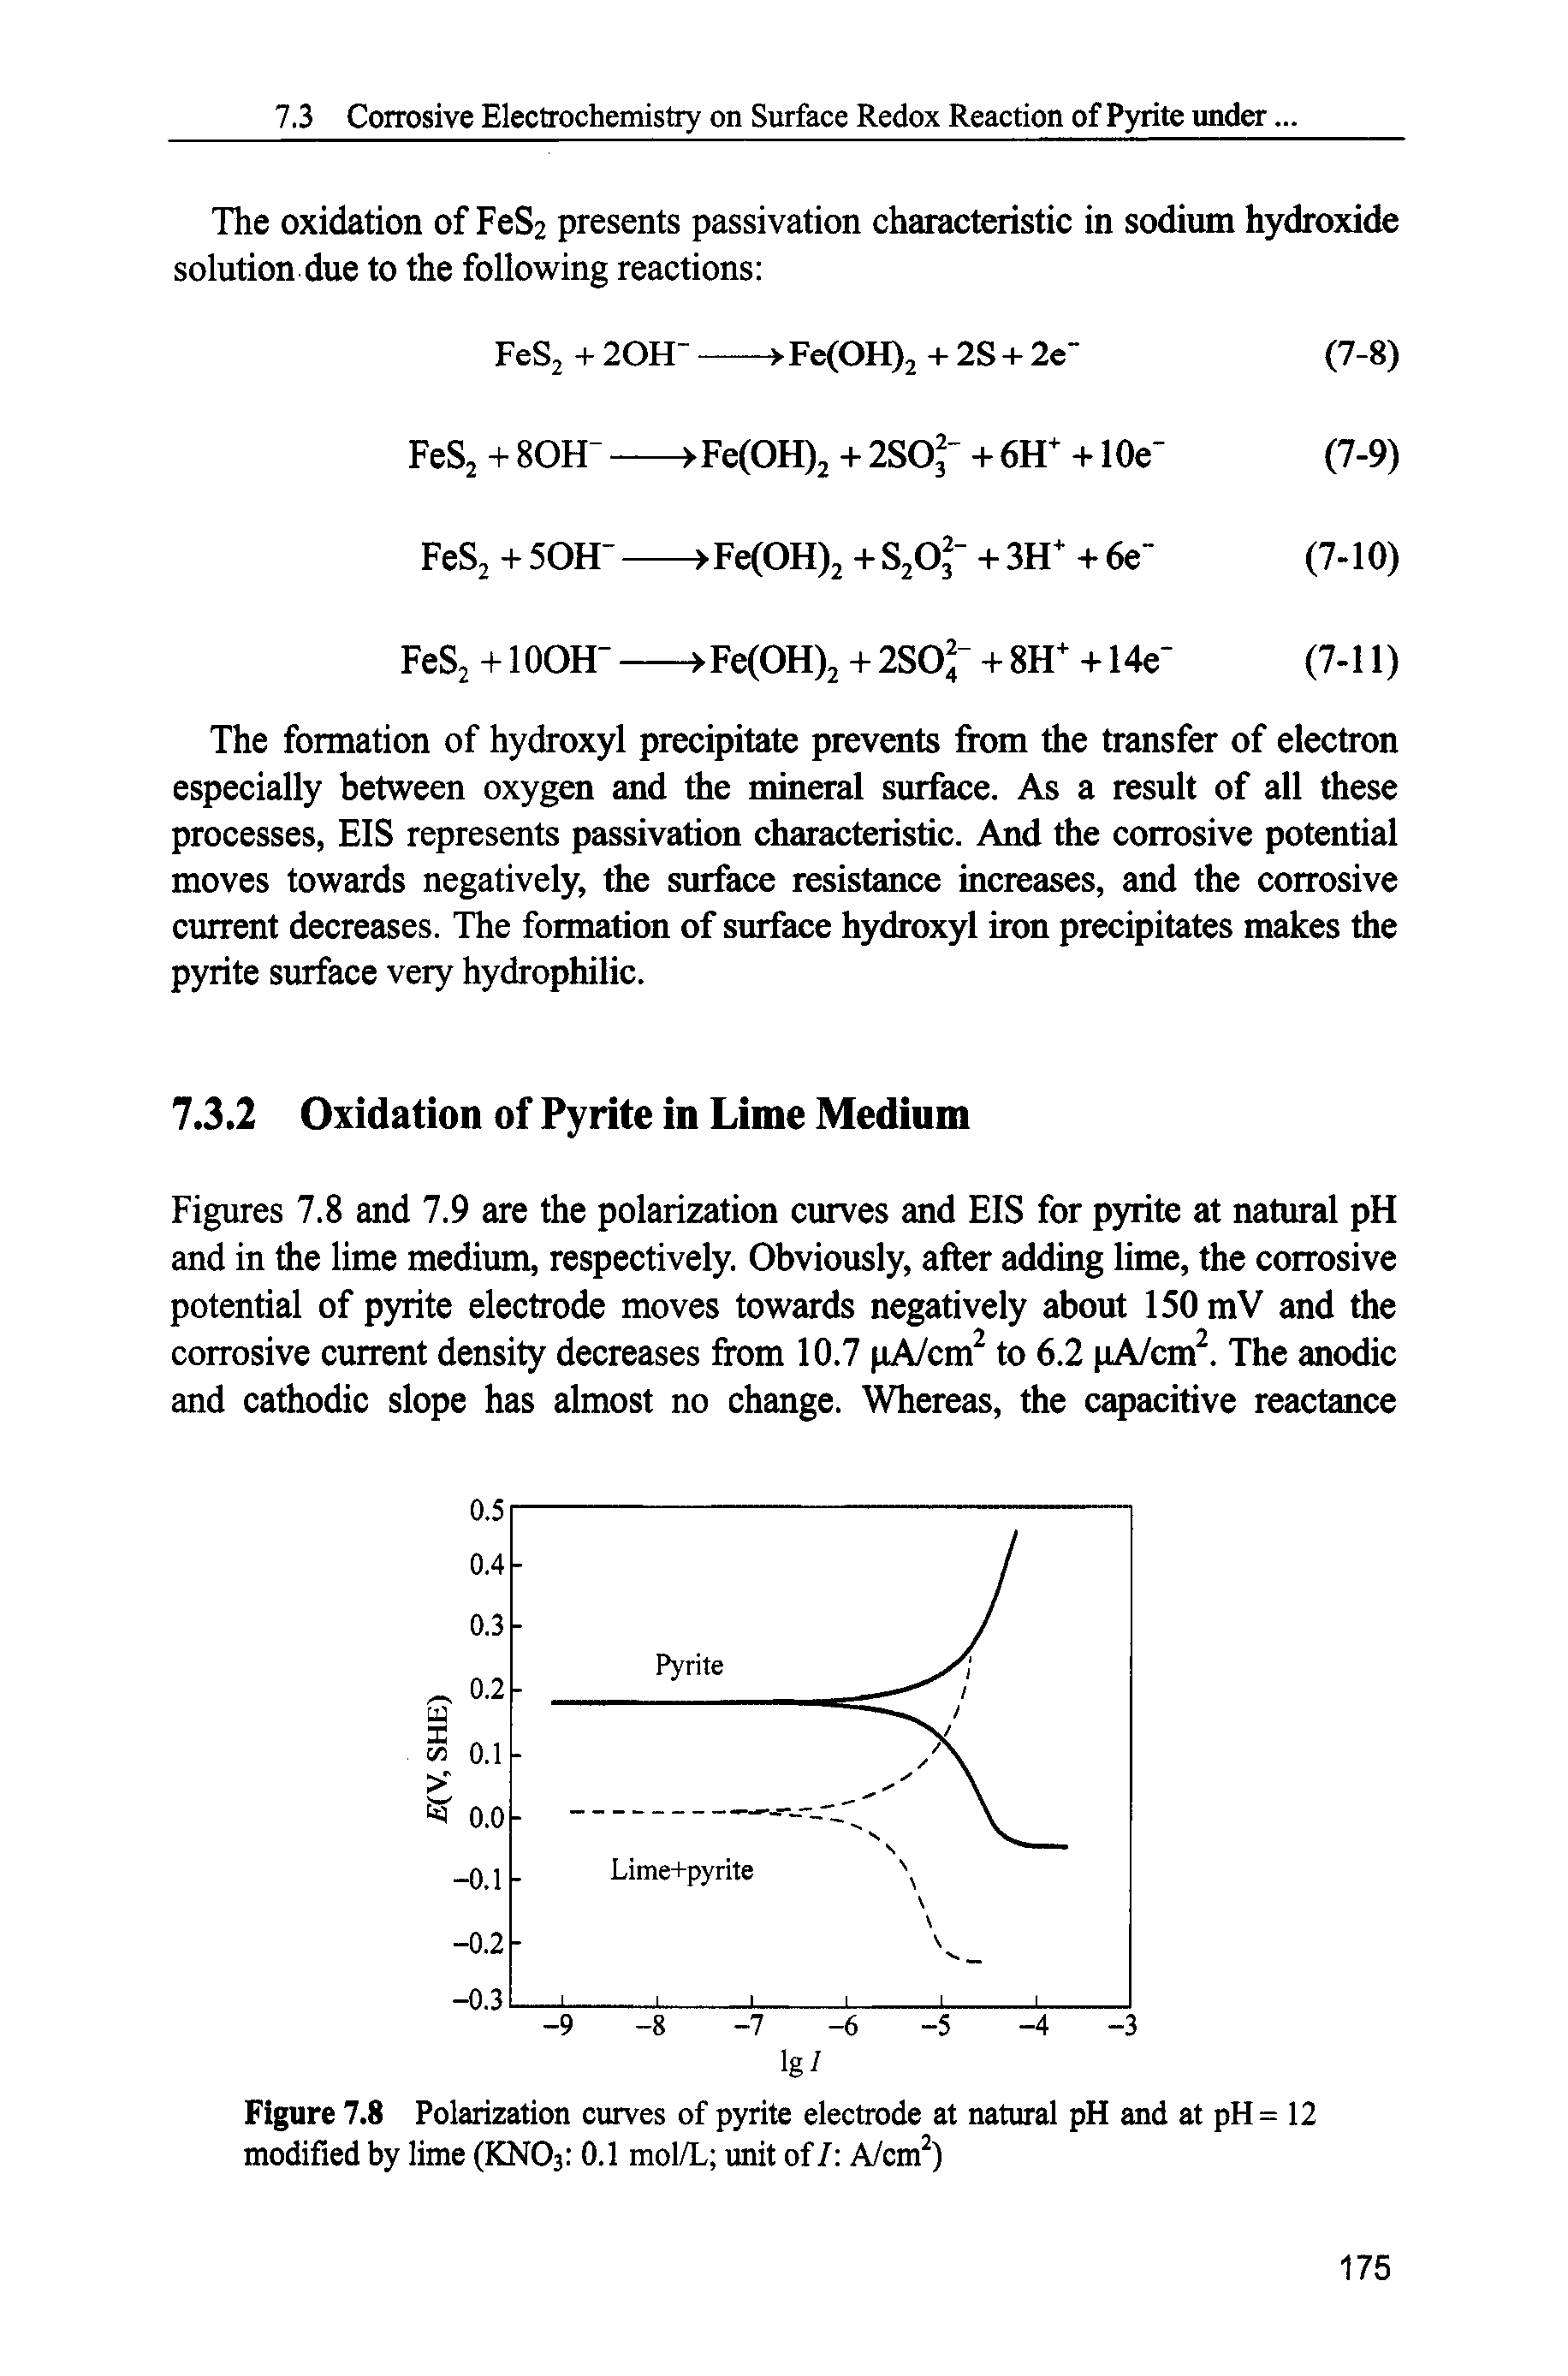 Figures 7.8 and 7.9 are the polarization curves and EIS for pyrite at natural pH and in the lime medium, respectively. Obviously, after adding lime, the corrosive potential of pyrite electrode moves towards negatively about 150 mV and the corrosive current density decreases from 10.7 pA/cm to 6.2 pA/cm. The anodic and cathodic slope has almost no change. Whereas, the capacitive reactance...